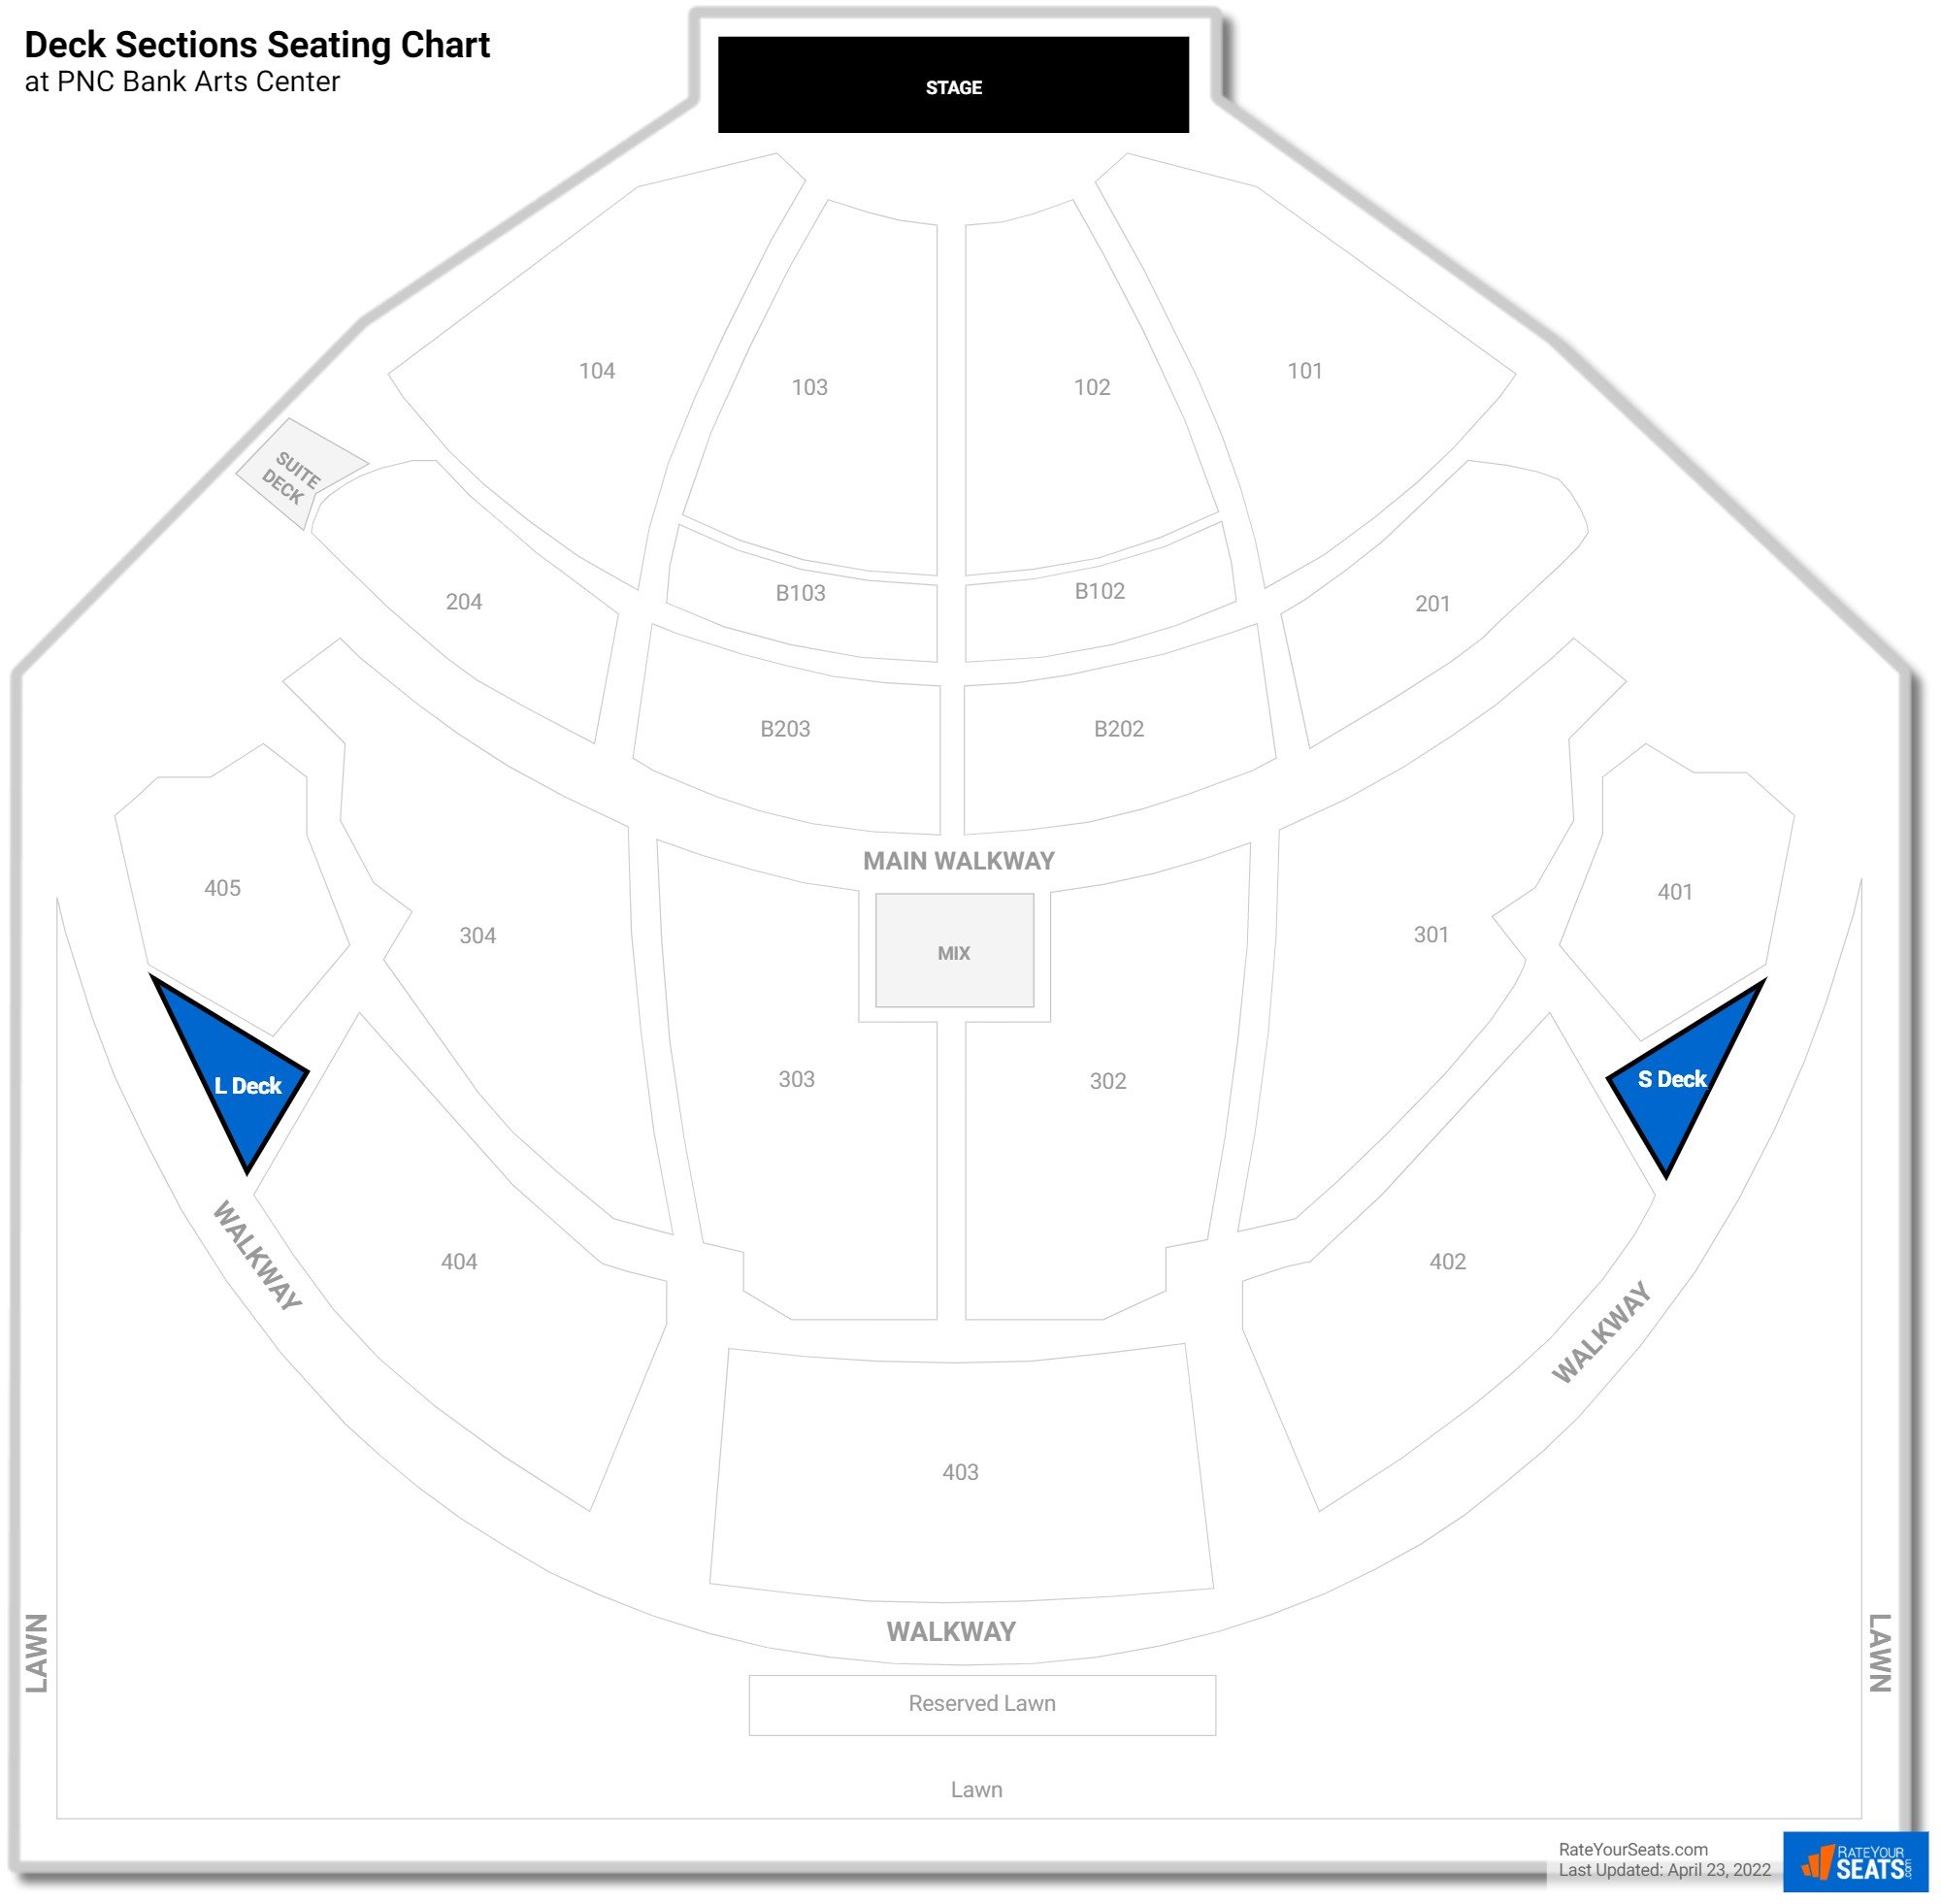 Concert Deck Sections Seating Chart at PNC Bank Arts Center